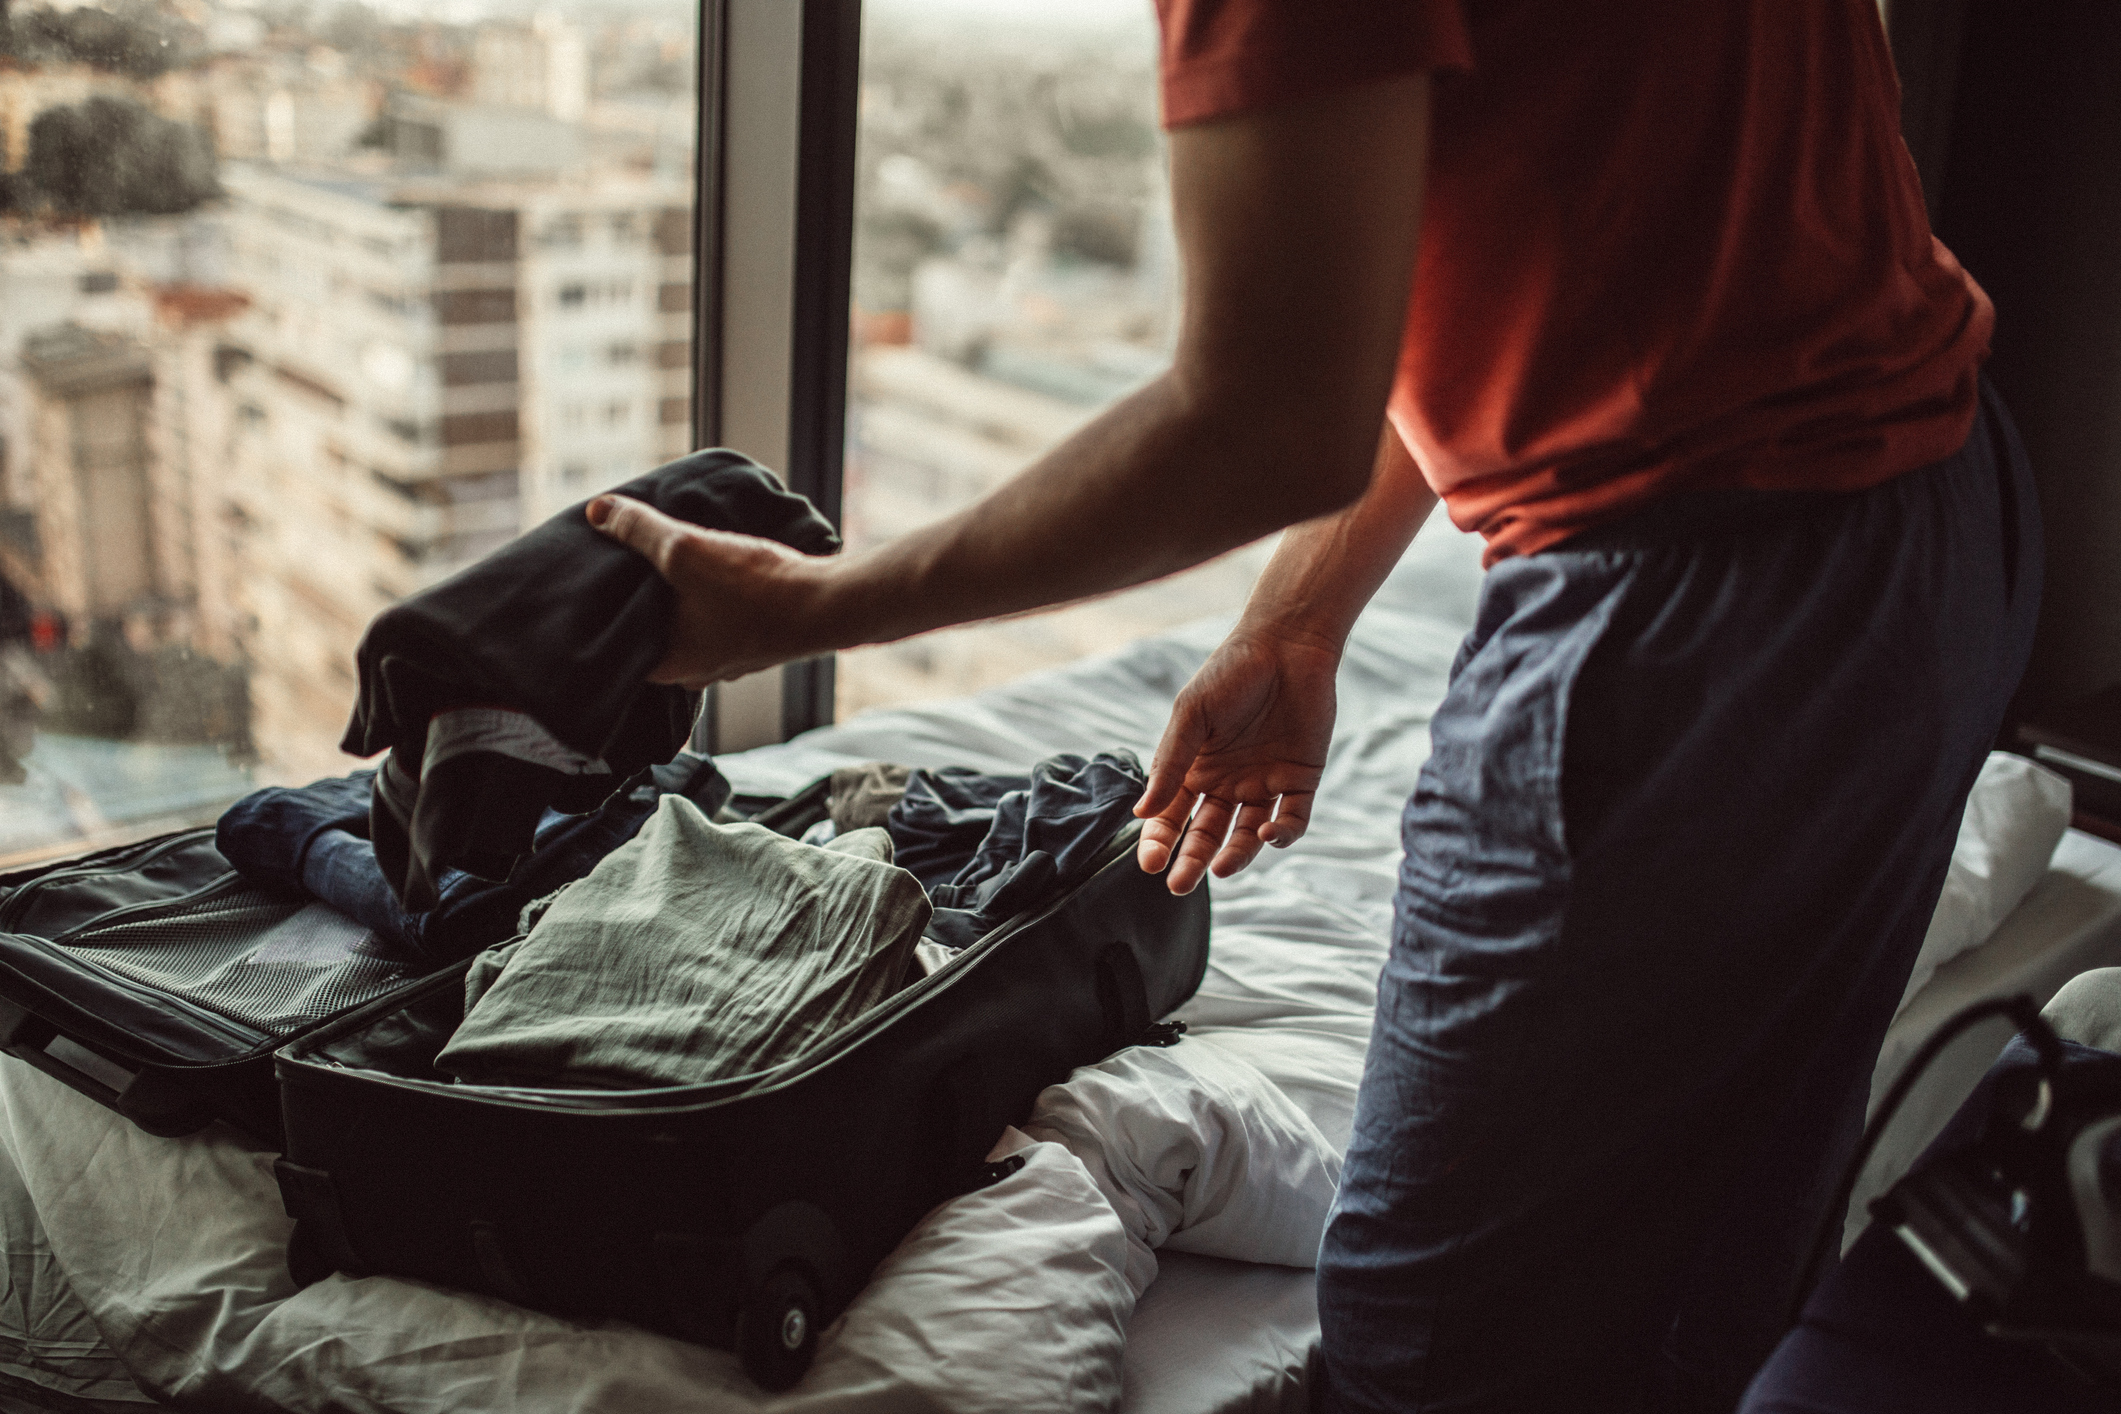 A guide to packing your suitcase without creasing